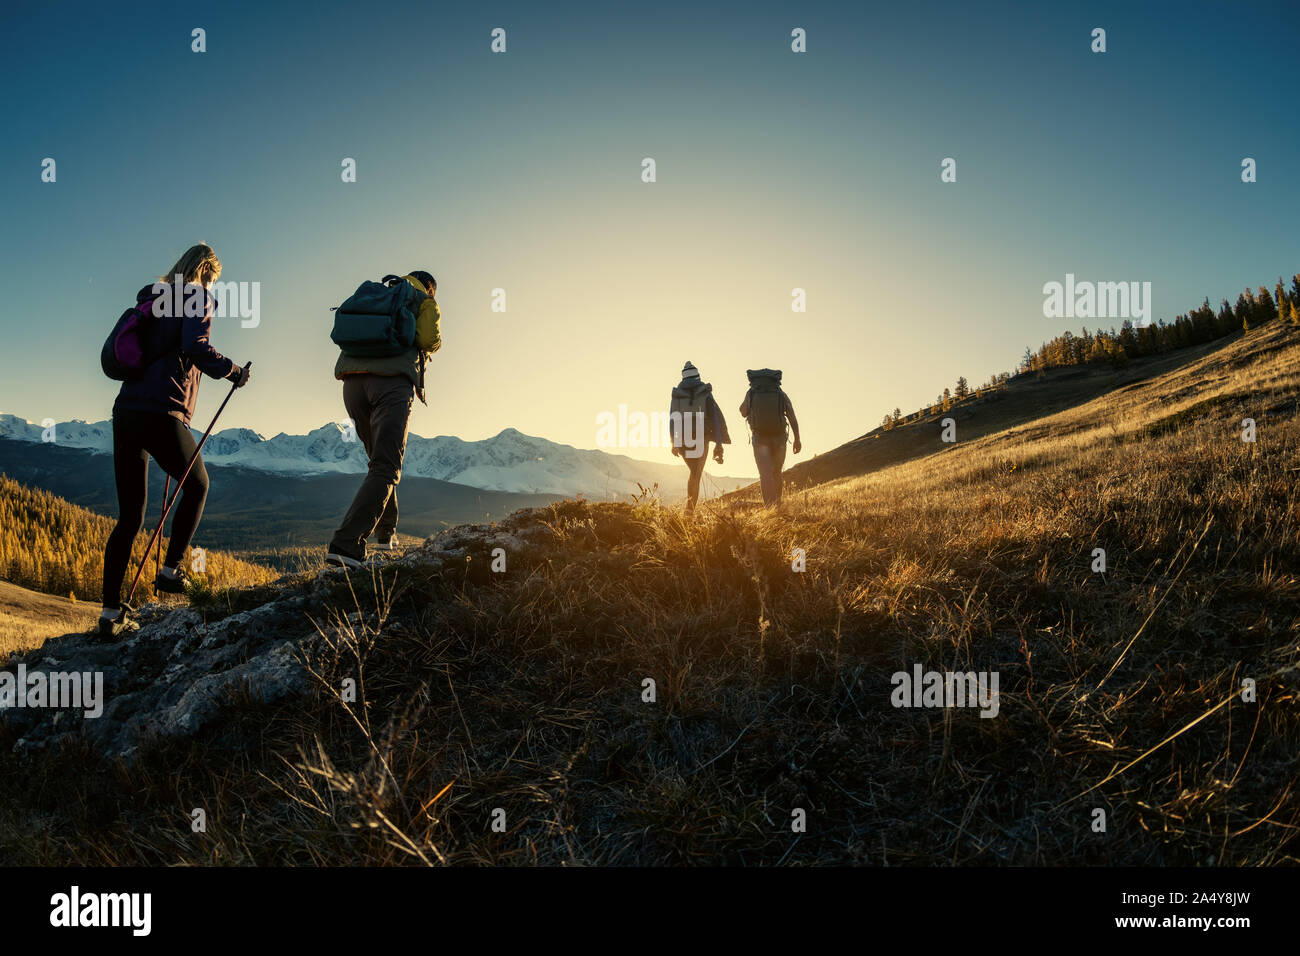 Group of young hikers walks in mountains at sunset time Stock Photo